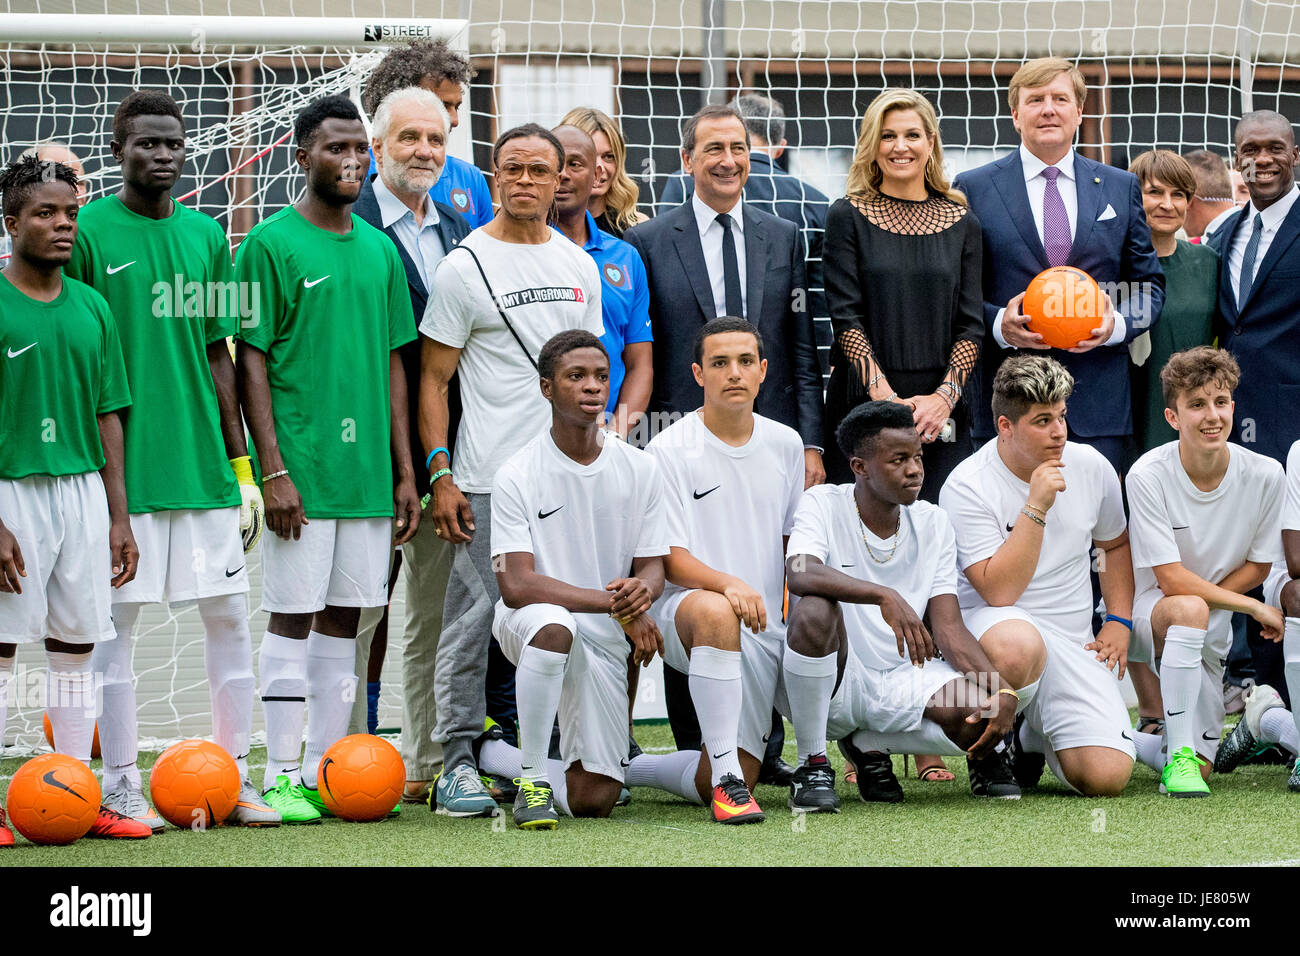 Milan, Italy. 22nd June, 2017. King Willem-Alexander and Queen Maxima of The Netherlands attend a soccer clinic with dutch former players Clarence Seedor, Aaron Winter, Pierre van Hooijdonk and Edgar Davids at the Piazette Reale in Milan, Italy, 22 June 2017. The King and Queen of the Netherlands are in Italy for an 4 day state visit. Photo: Patrick van Katwijk Netherlands OUT/Point de Vue OUT - NO WIRE SERVICE - Photo: Patrick van Katwijk/Dutch Photo Press/dpa/Alamy Live News Stock Photo